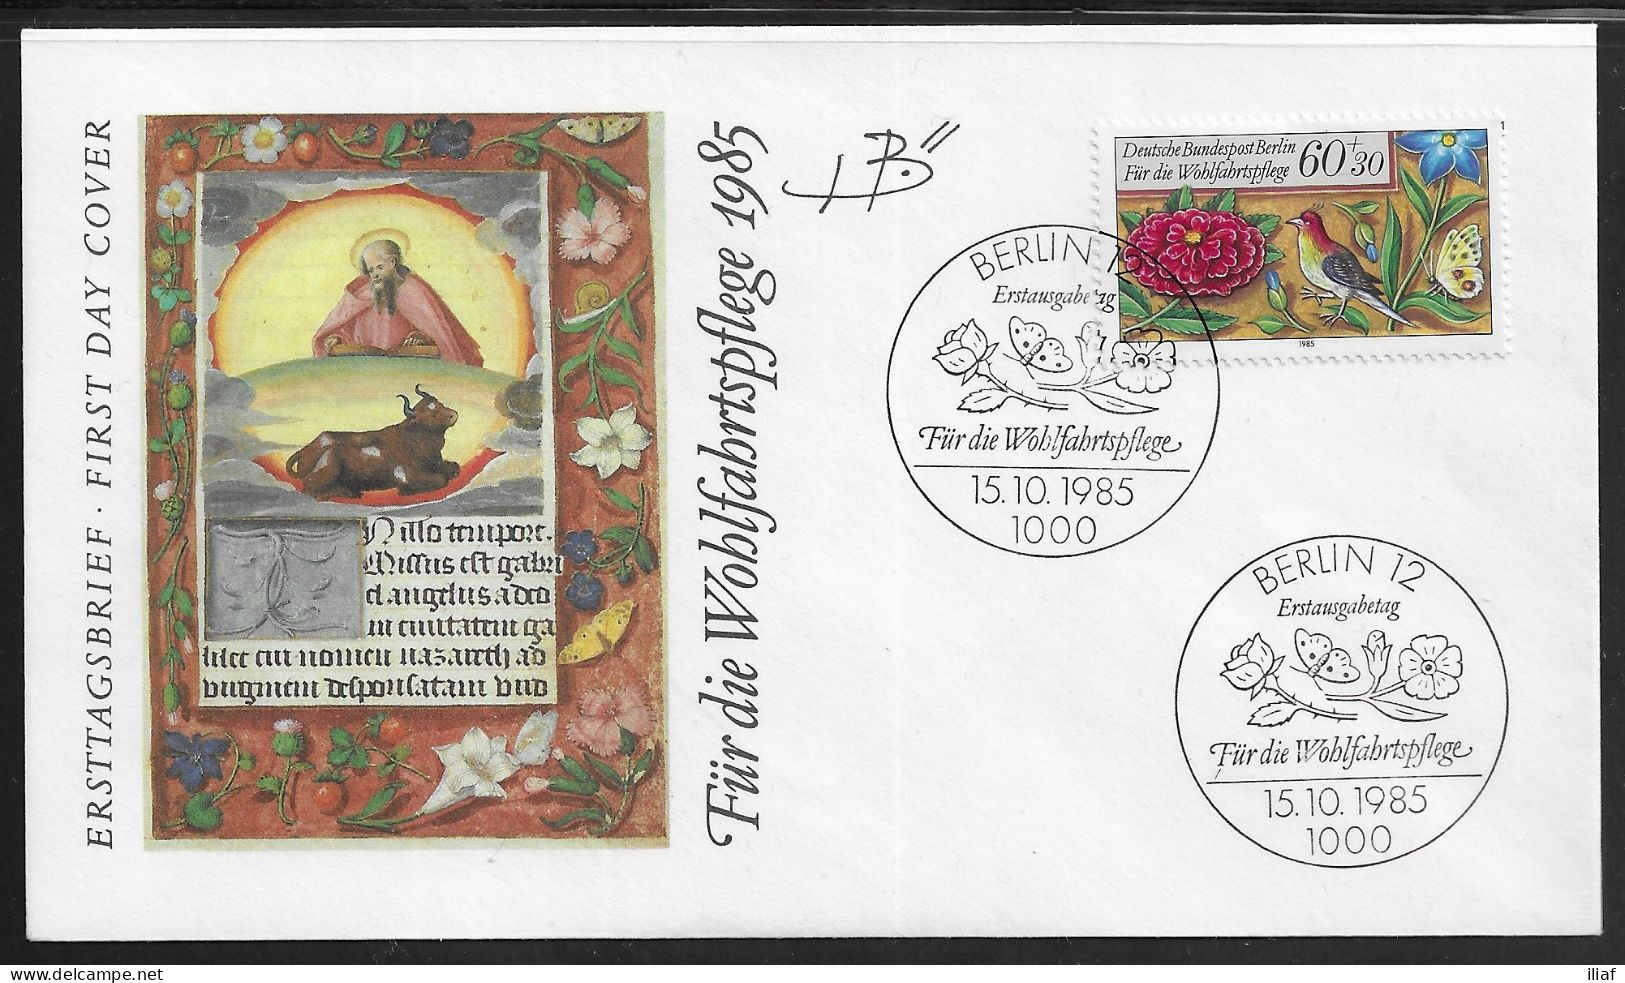 Germany Berlin. FDC Mi. 744-747. 4 Envelopes.  Welfare: Miniatures.  FDC Cancellation On FDC Envelopes - 1981-1990